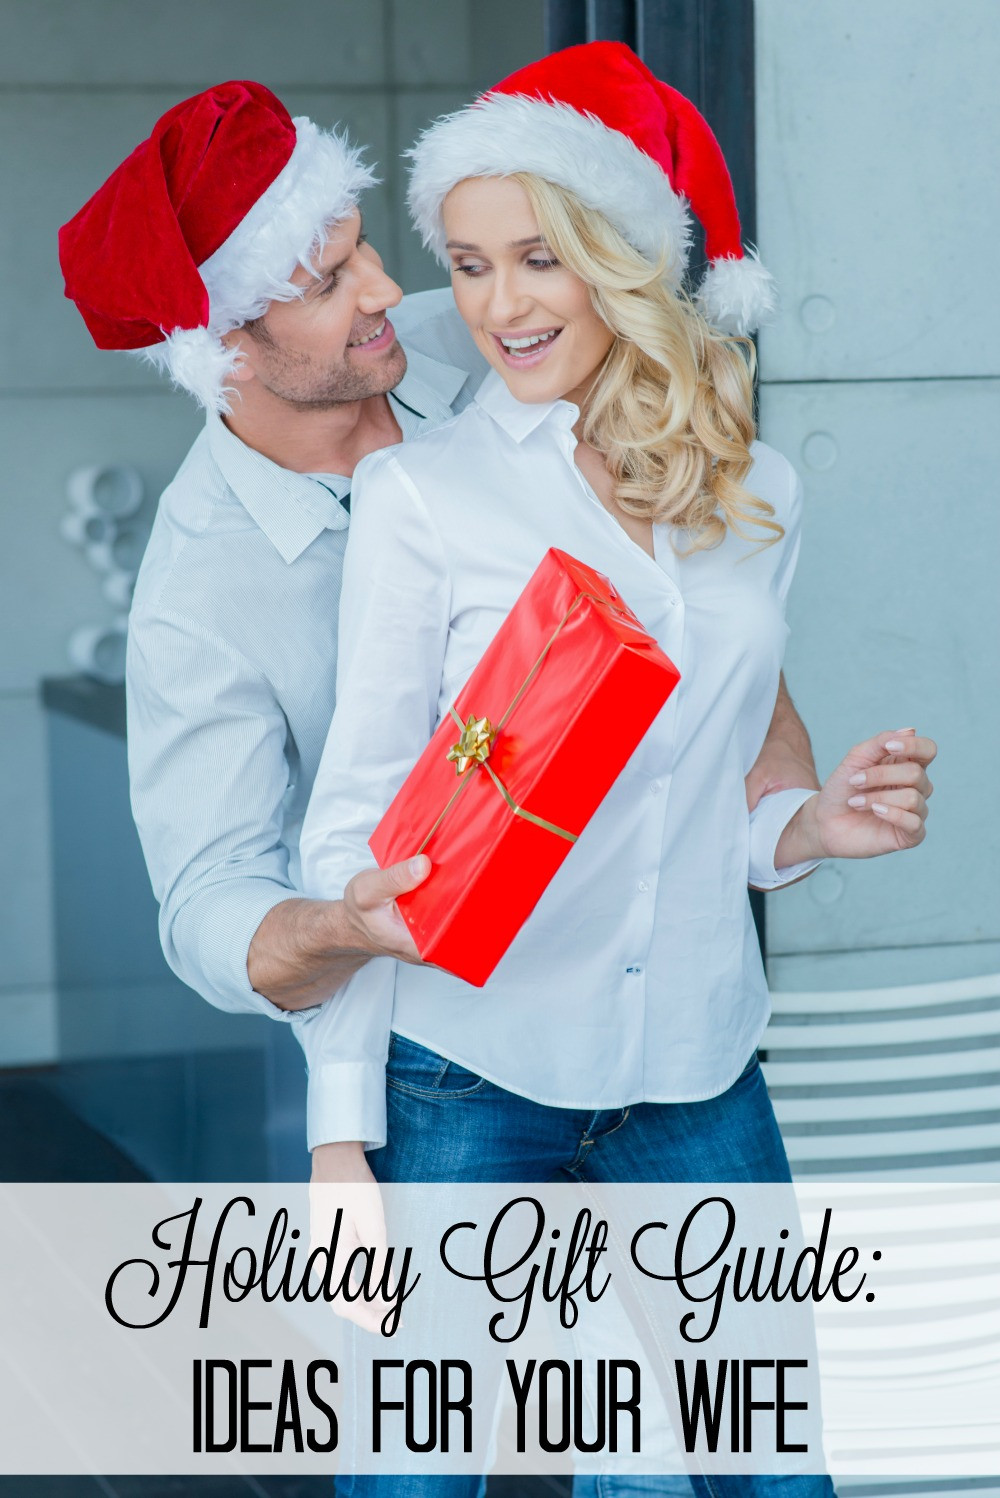 Wife Christmas Gift Ideas
 Holiday Gift Guide Ideas for the Wife